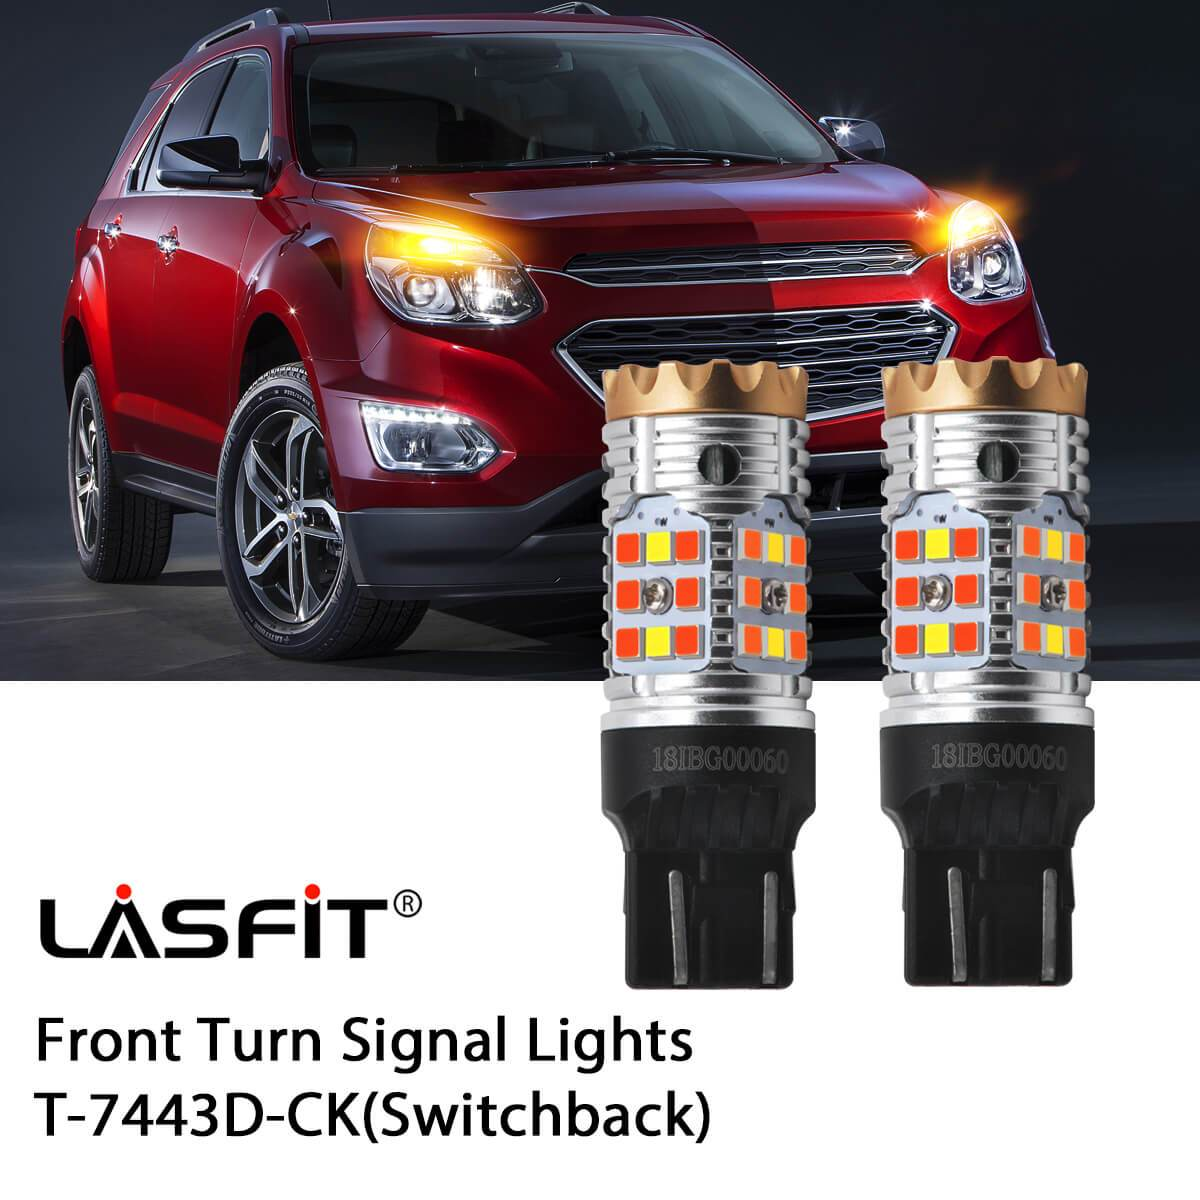 Lasfit D1S D1R D3S D3R LED Headlight Bulbs HID/XENON Replacement-100W  11000LM 6000K